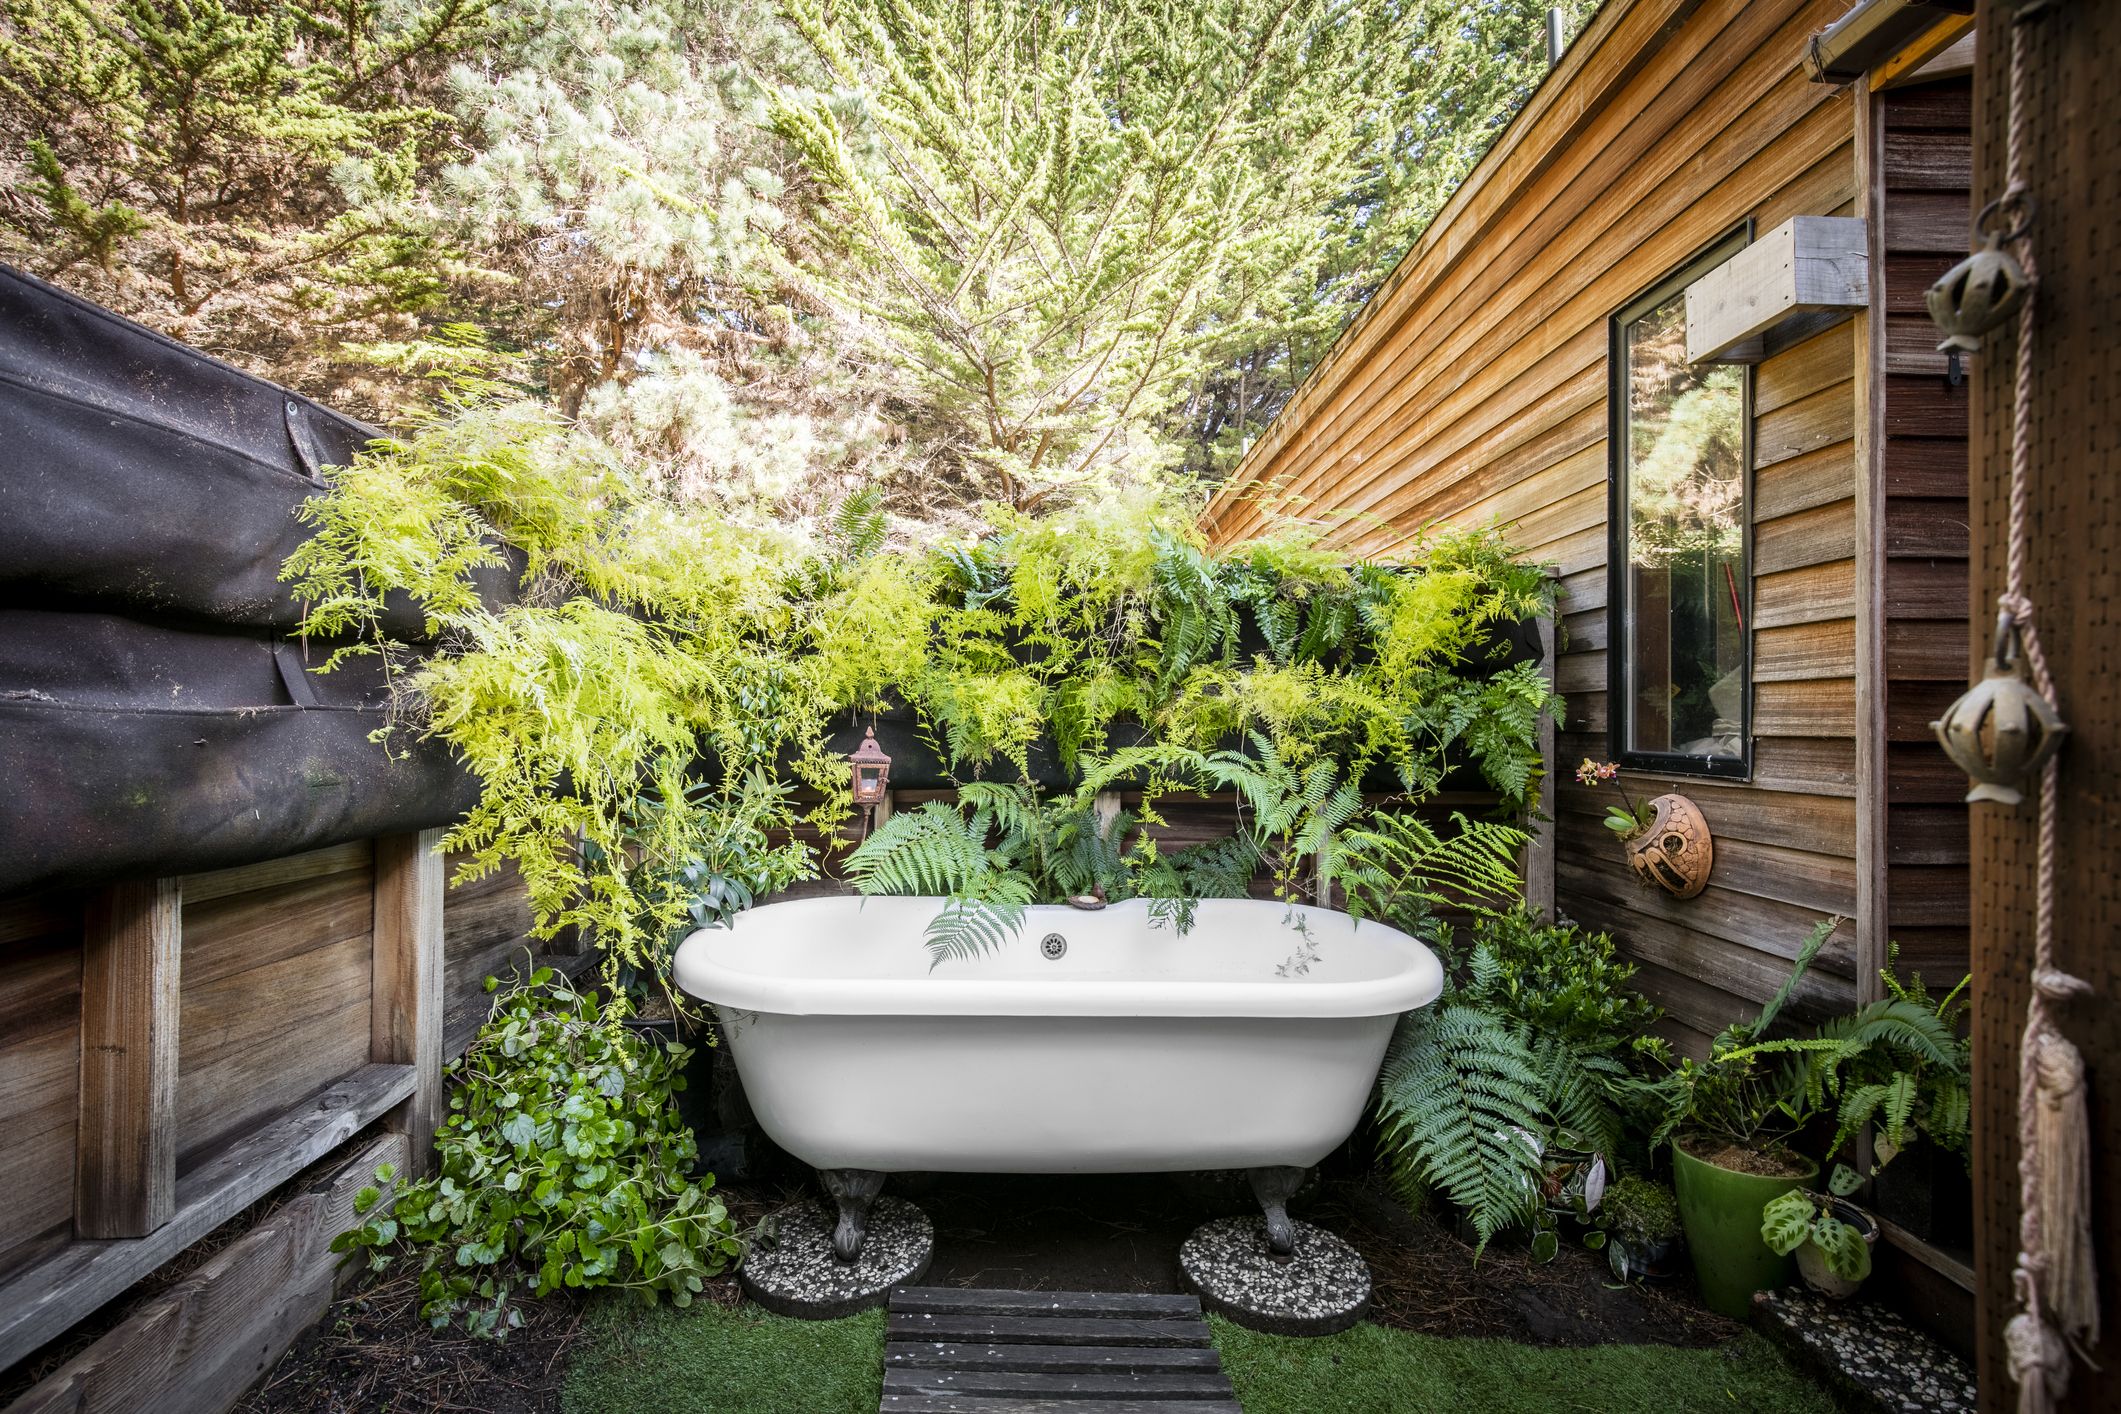 How Do I Decorate My Outdoor Tub